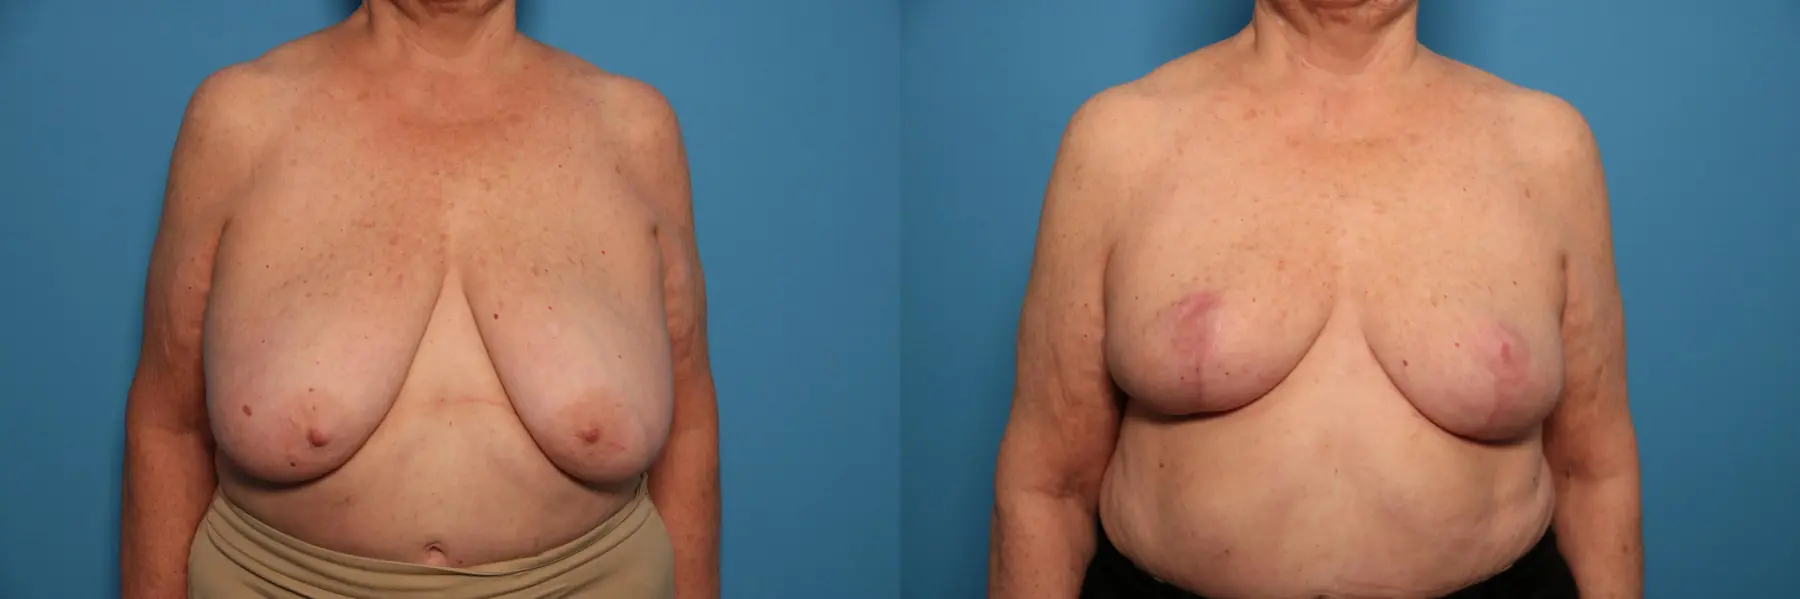 Breast Lift-Reduction: Patient 19 - Before and After  